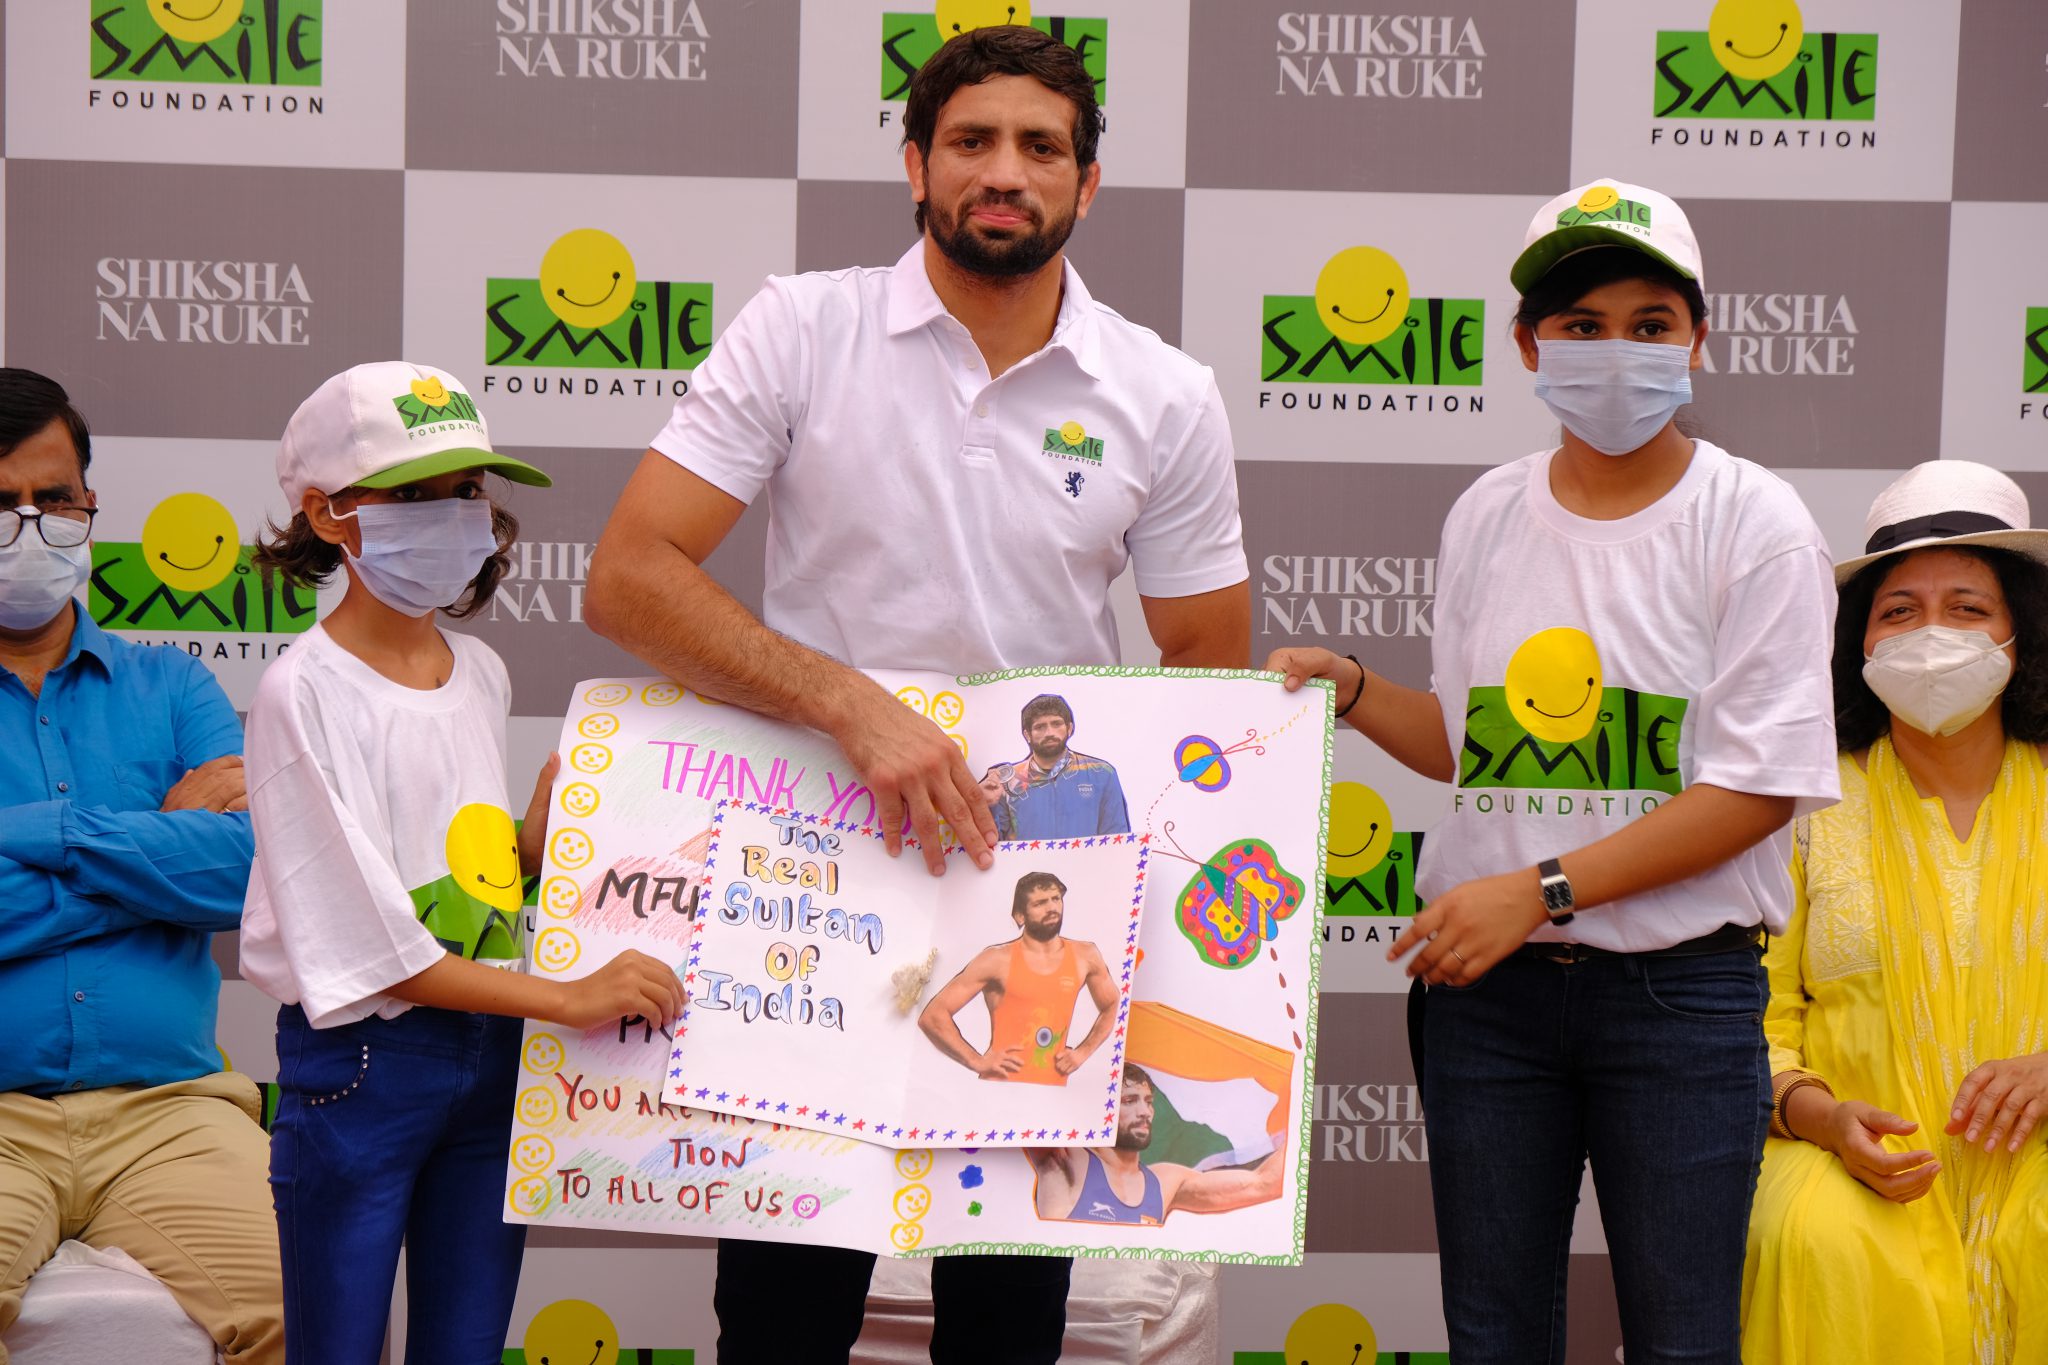 ‘Want Youngsters To Be Inspired’: Ravi Dahiya Teams Up with Shiksha Na Ruke by Smile Foundation